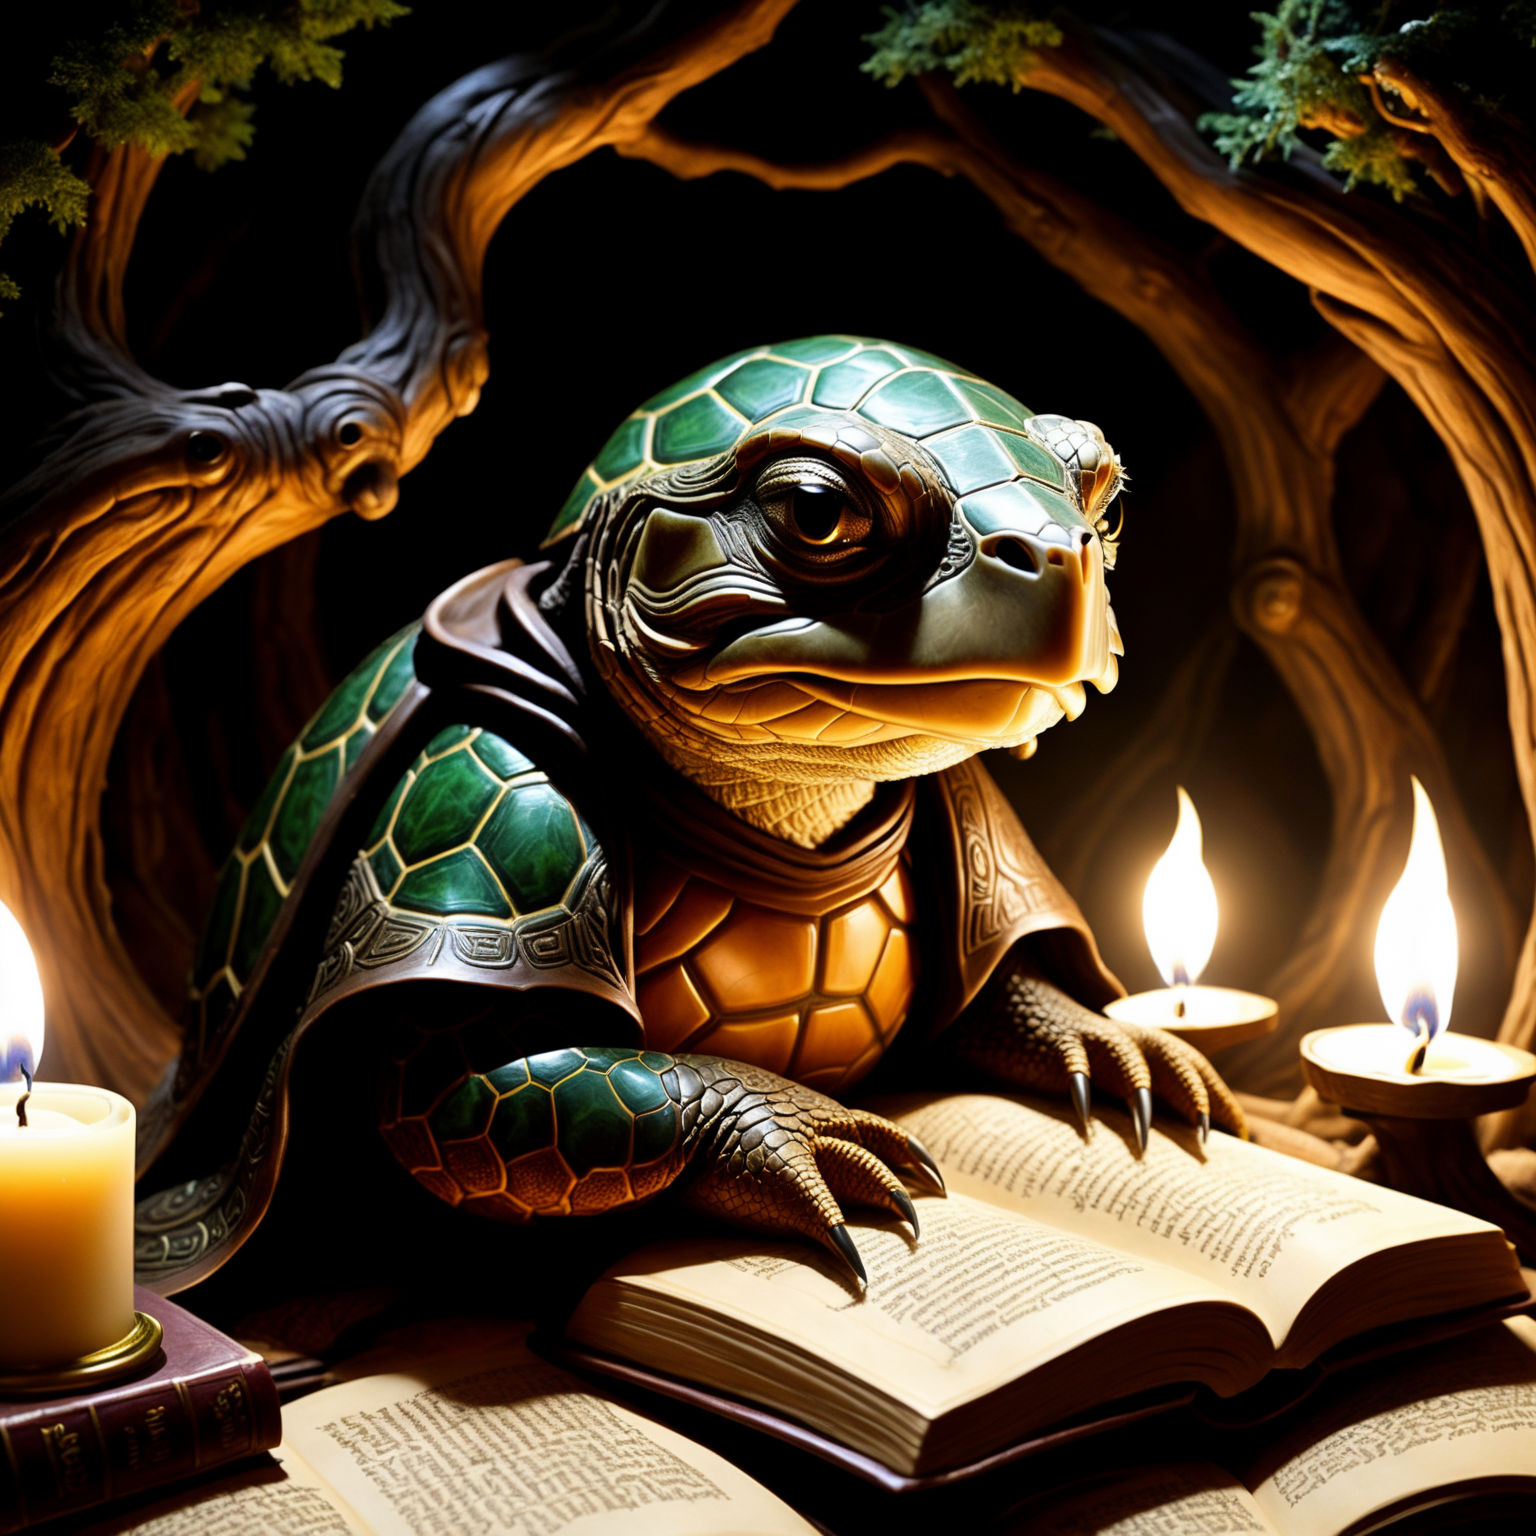 39. A wise old turtle wizard reading an ancient tome by candlelight in a library carved out of a colossal tree. Tolkien-es...